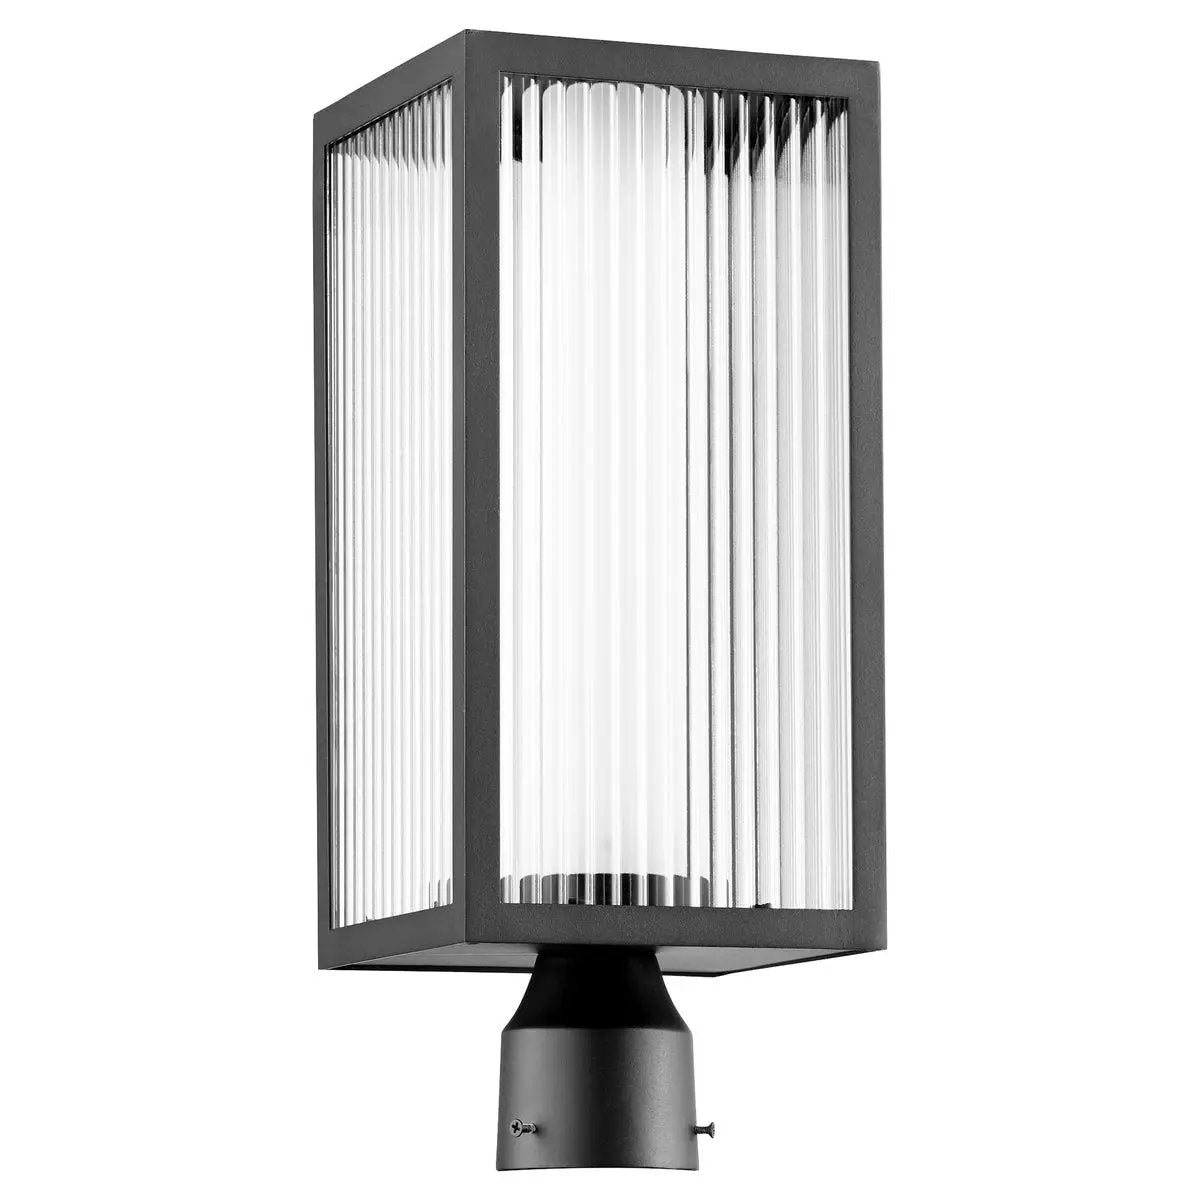 Outdoor Modern Post Light with sleek design, frosted shade inside clear fluted glass exterior. 3 dimmable LED light sources. Noir finish.